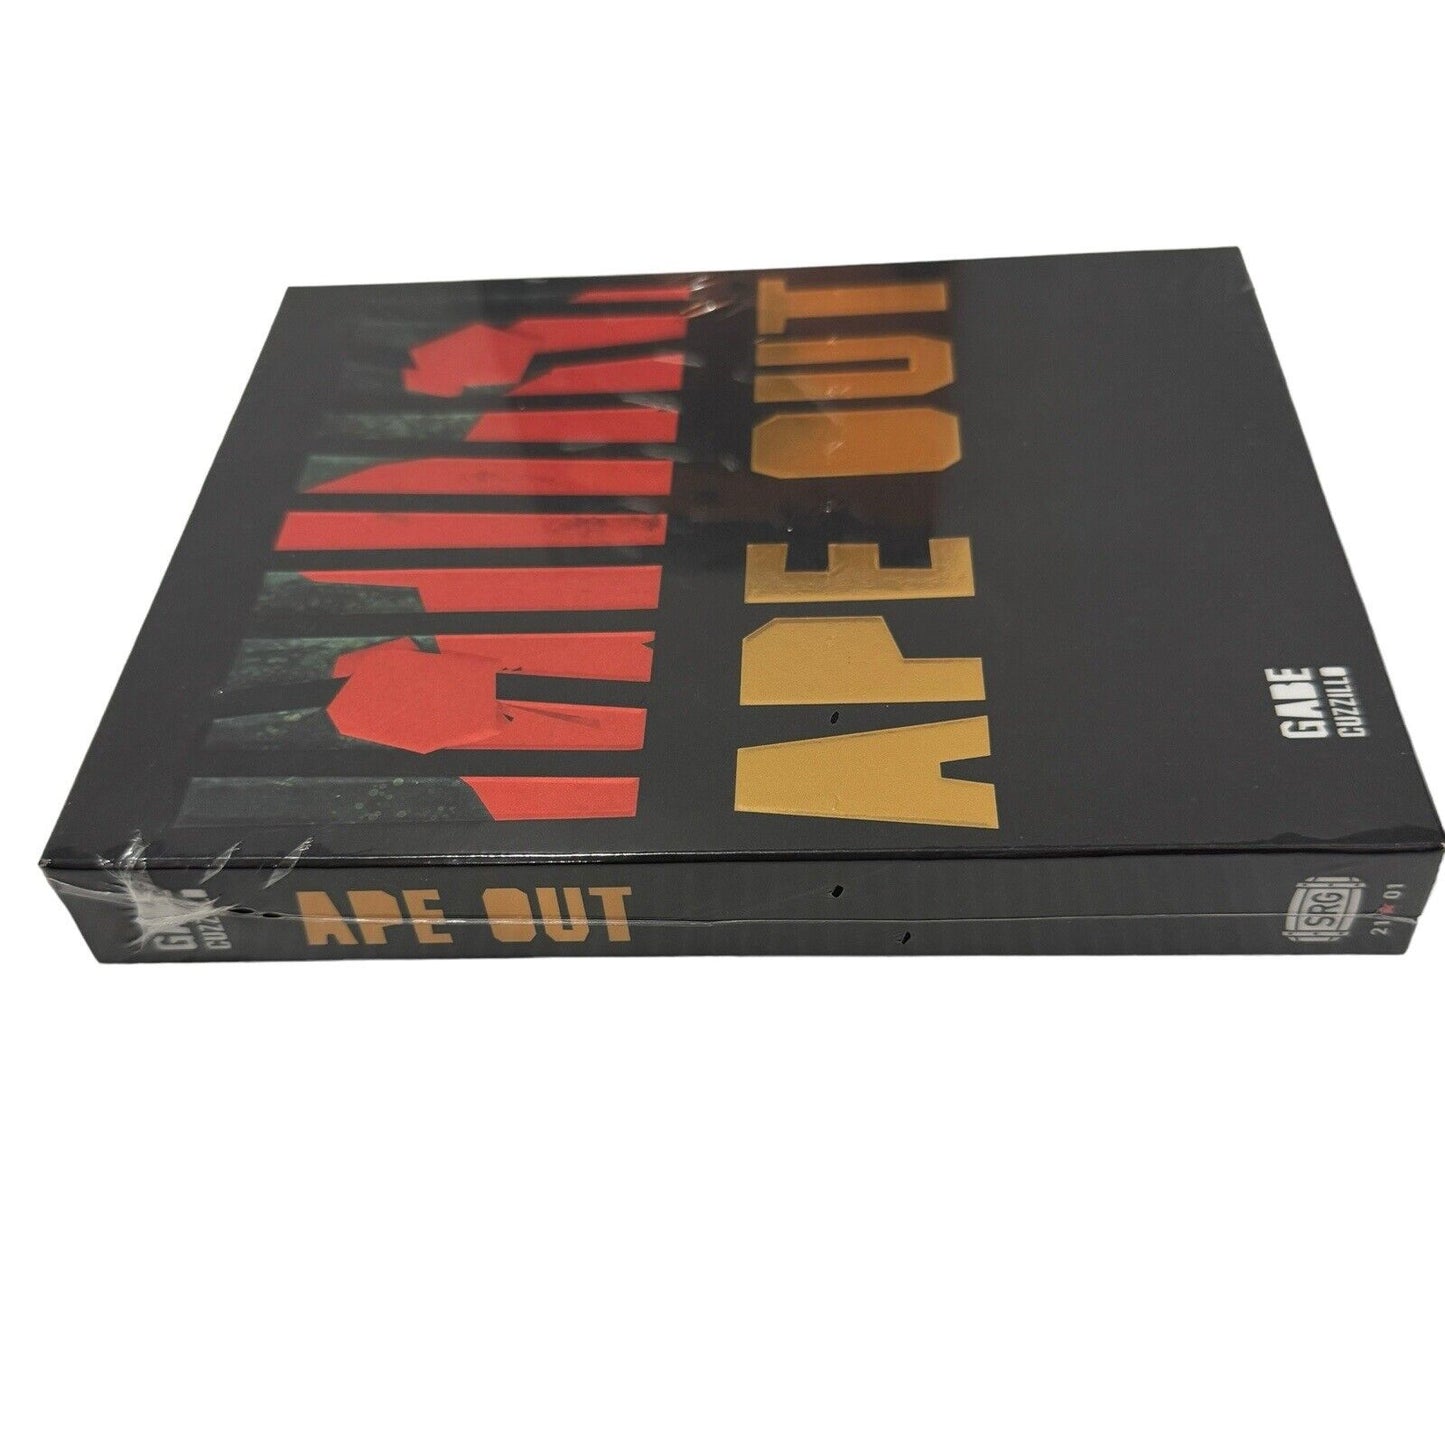 Ape Out Switch & Steelbook Unnumbered Limited Run Special Reserve Games Sealed